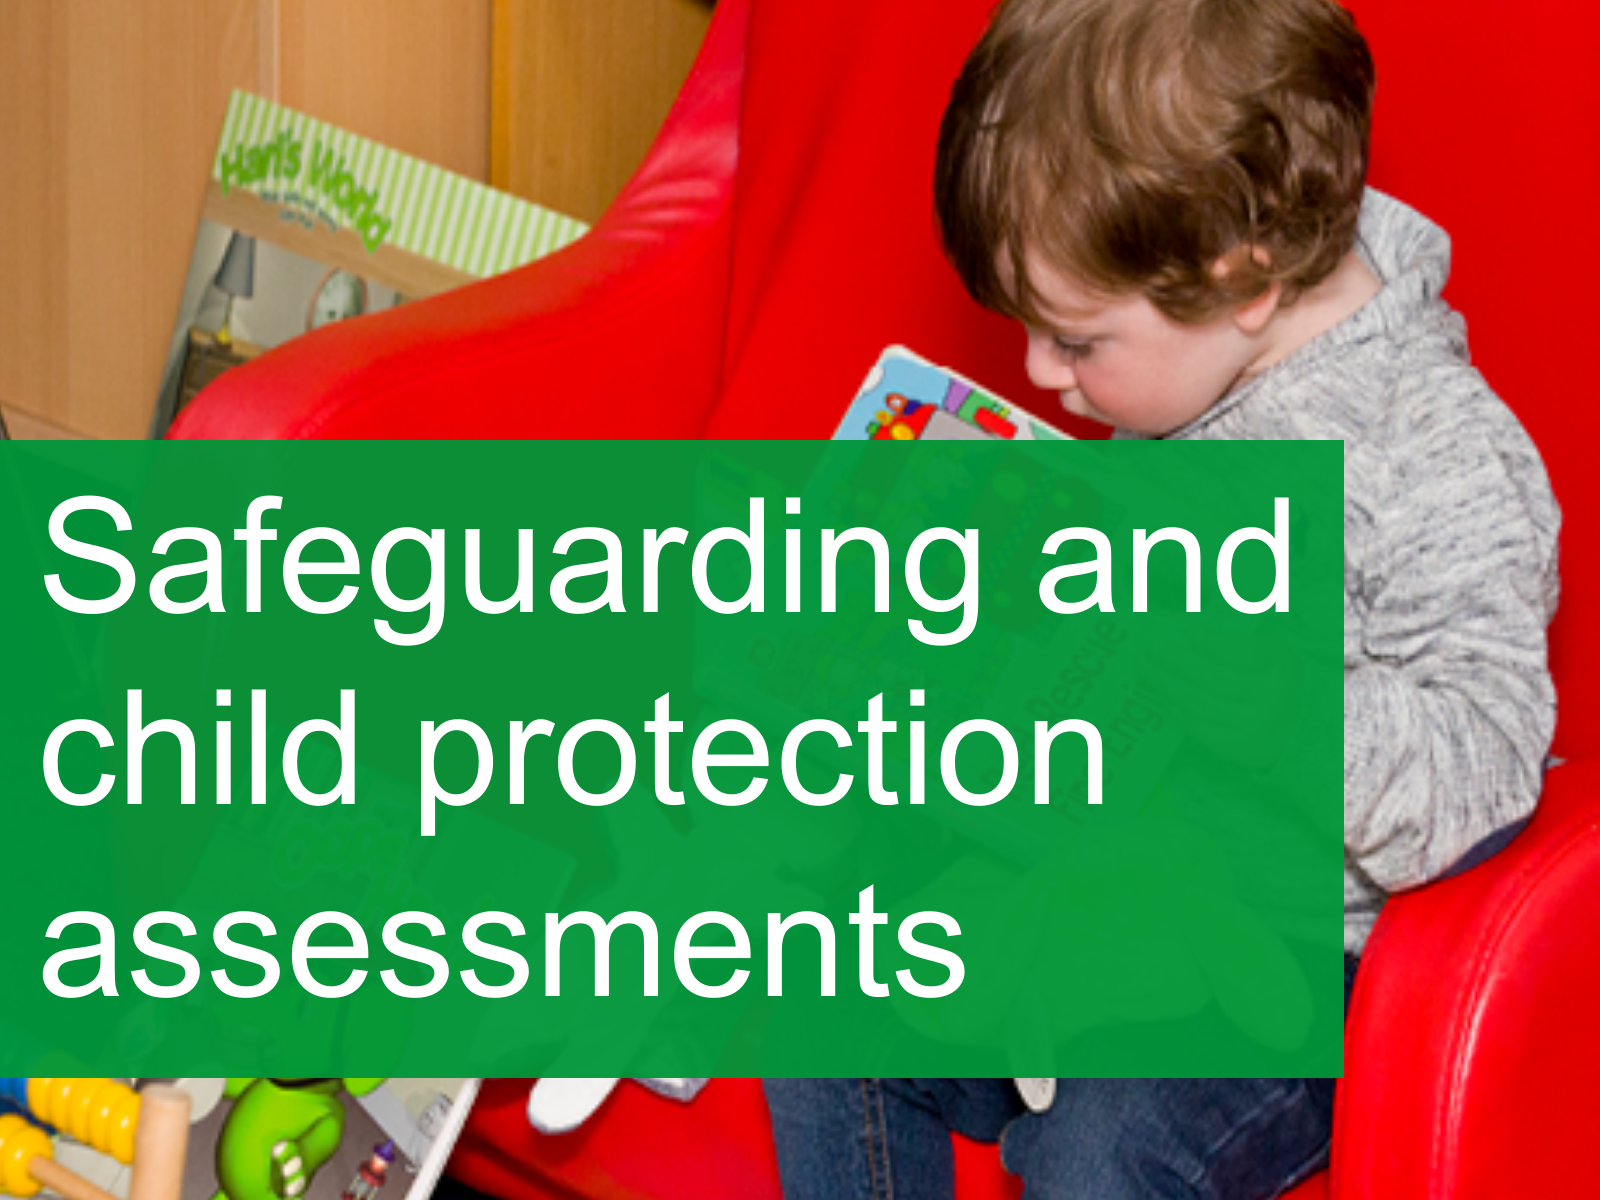 Safeguarding and child protection assessments